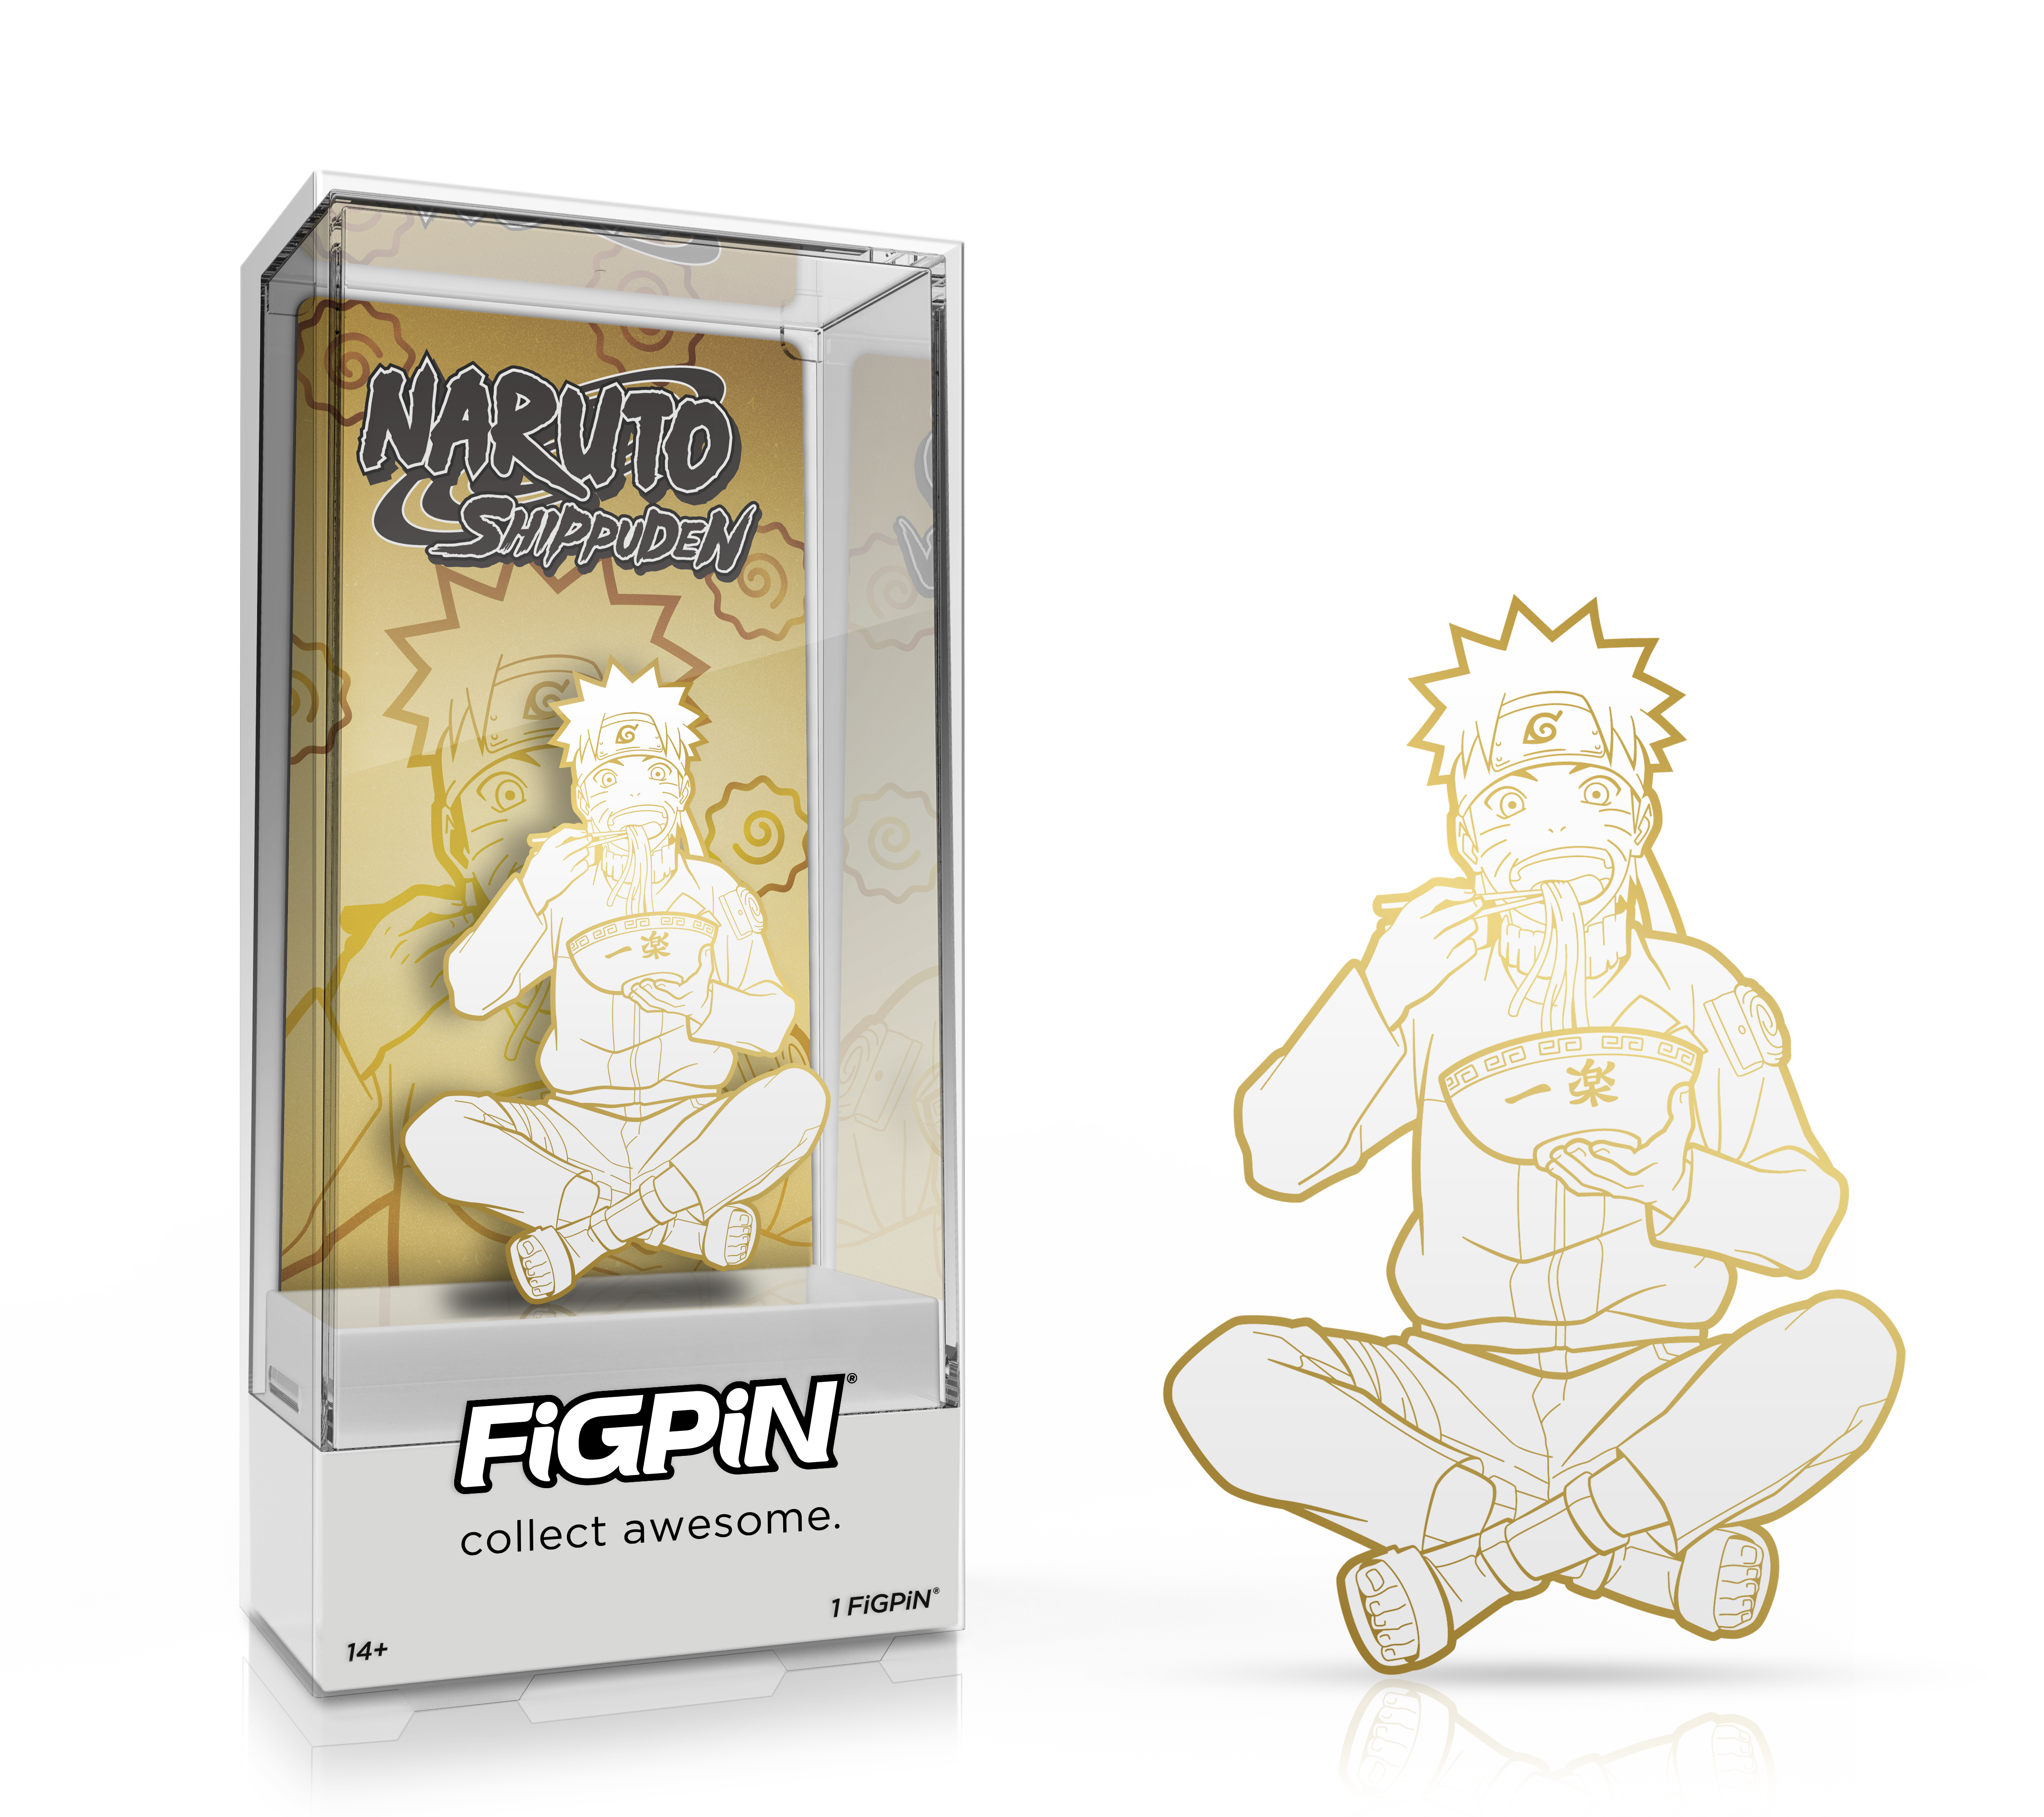 Side by side view of the Naruto Uzumaki (super rare) enamel pin in display case and the art render.